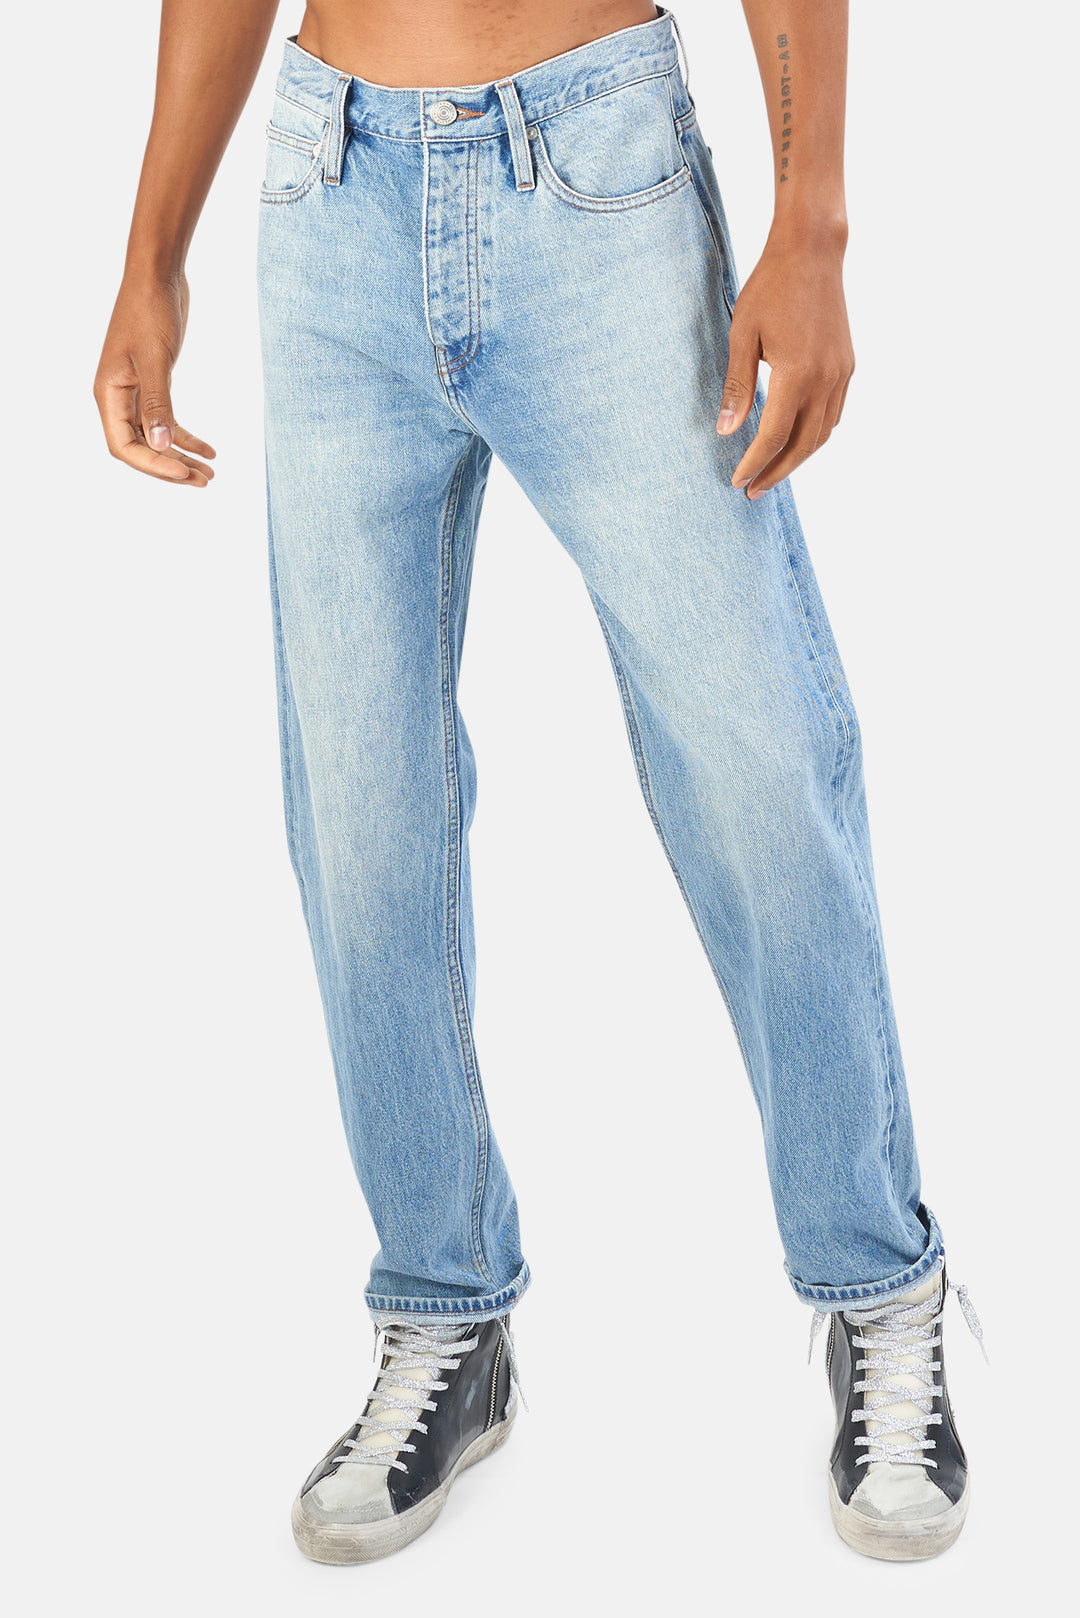 FRAME Blue Washed Selvedge Straight Fit Jeans - blueandcream